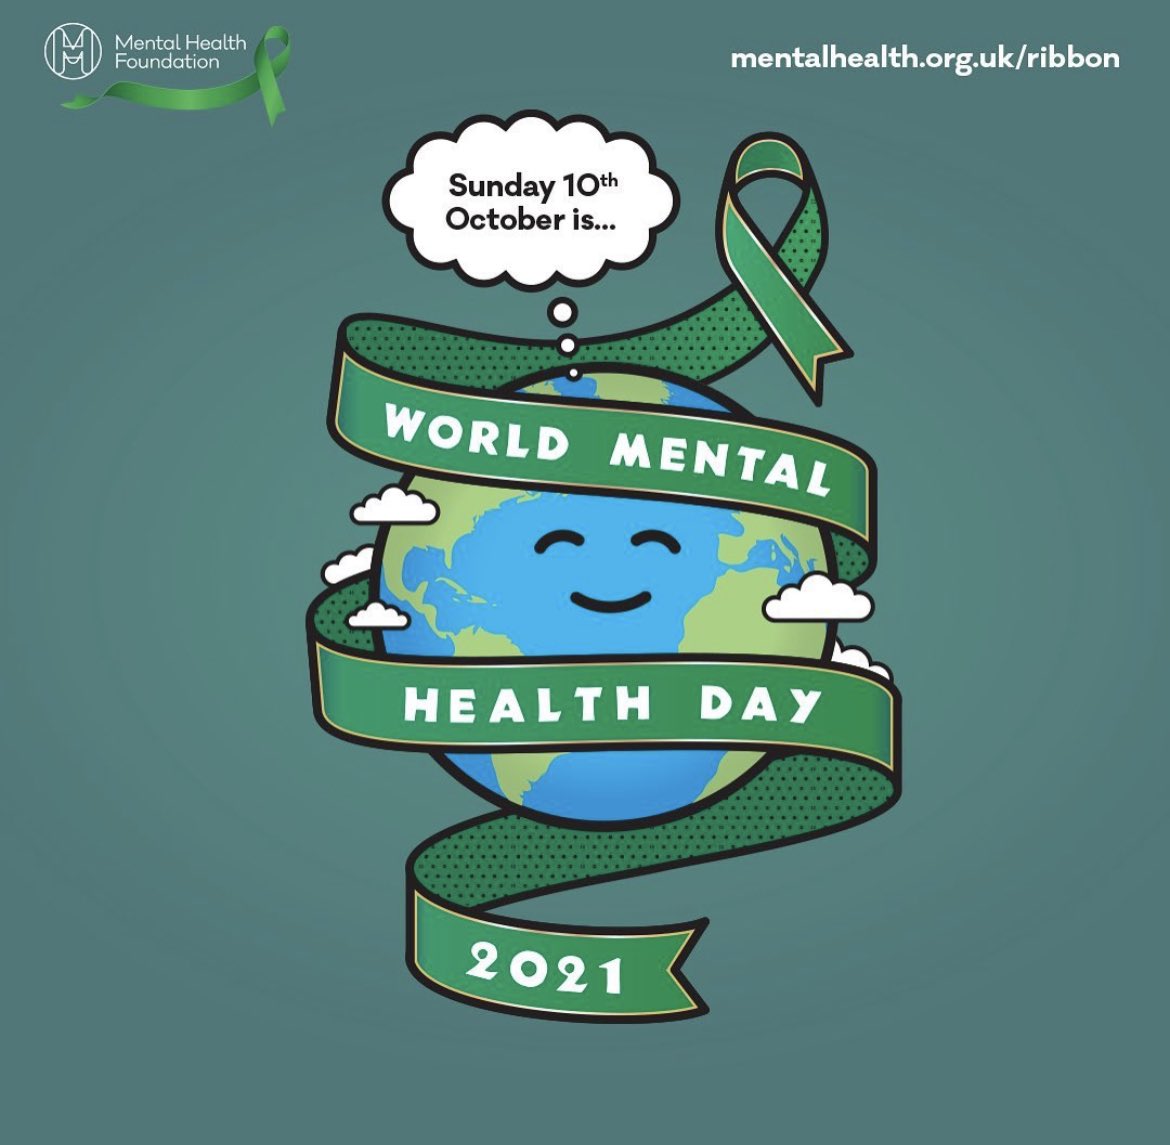 Today is World Mental Health Day.
Talk to others, reach out. Think about what you need for your own self care. #worldmentalhealthday 
Some tips and advice at zestwellbeing.co.uk